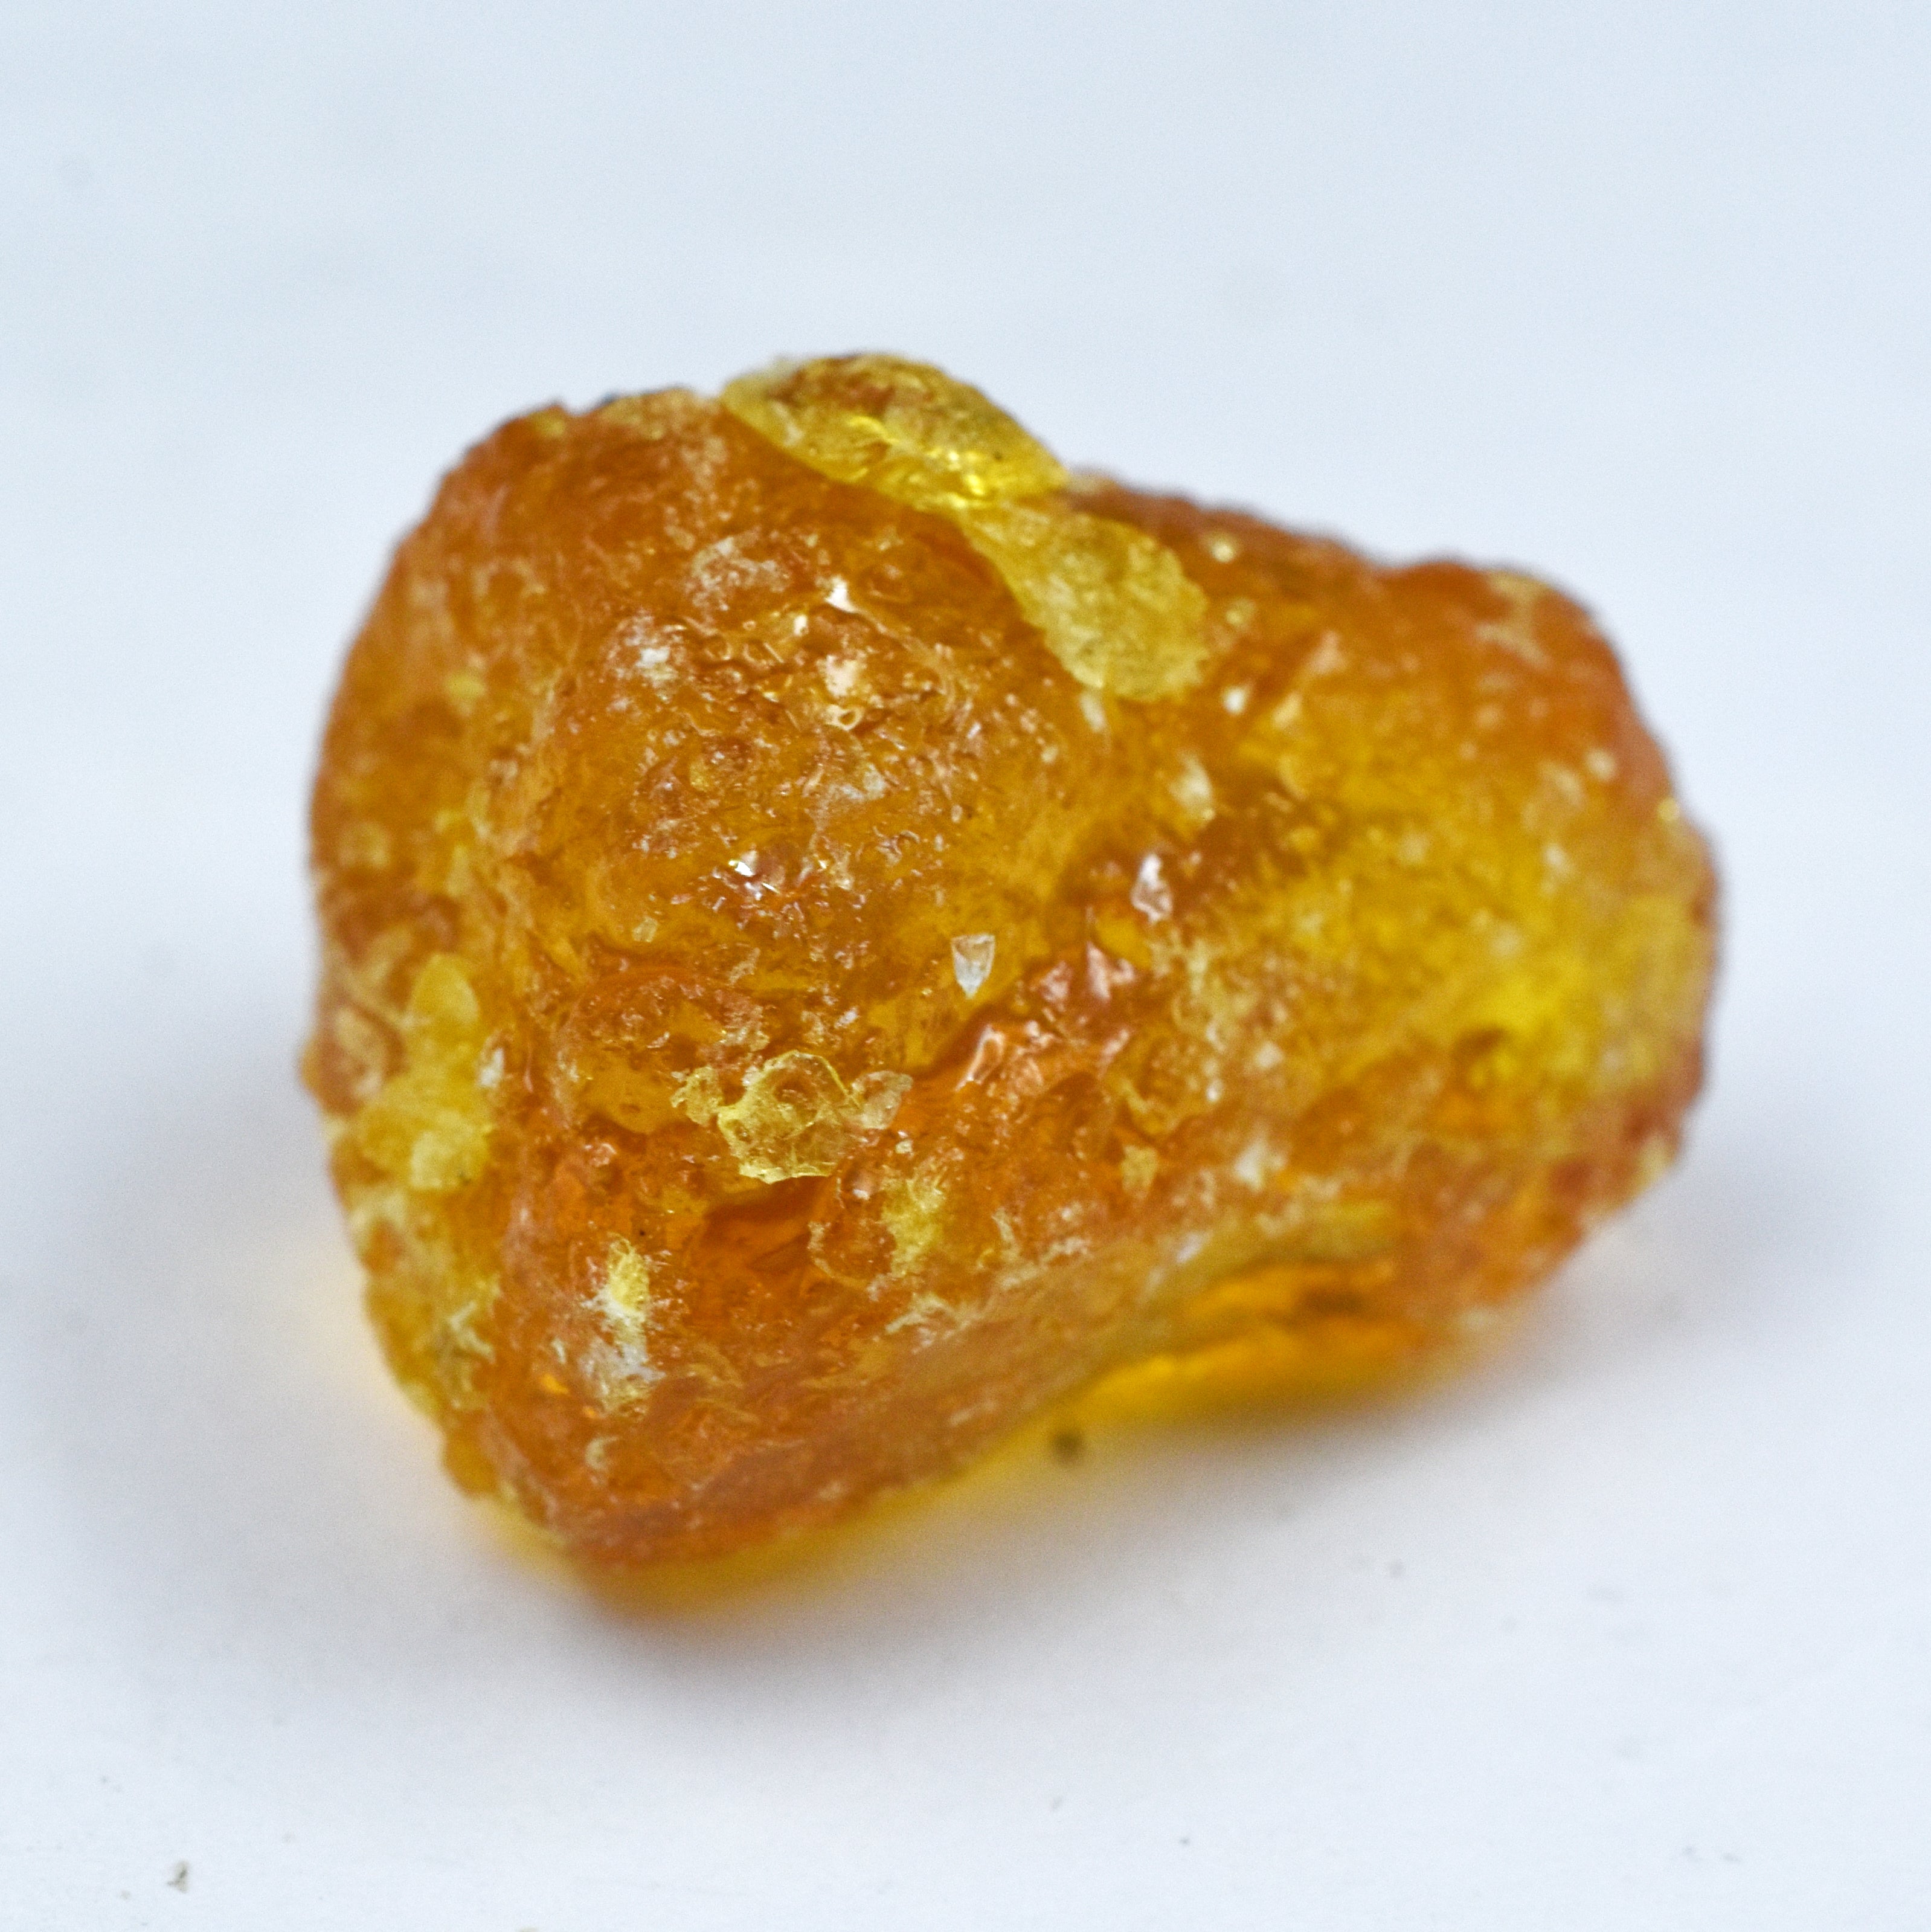 Natural Rough CERTIFIED 24.35 Ct Orange Amber Uncut Raw Rough Loose Gemstone Raw Amber Poland Mines, Healing Protection, Natural Yellow Amber Gemstone Rough, Clean Transparent Insect Amber Rough For Jewelry Making